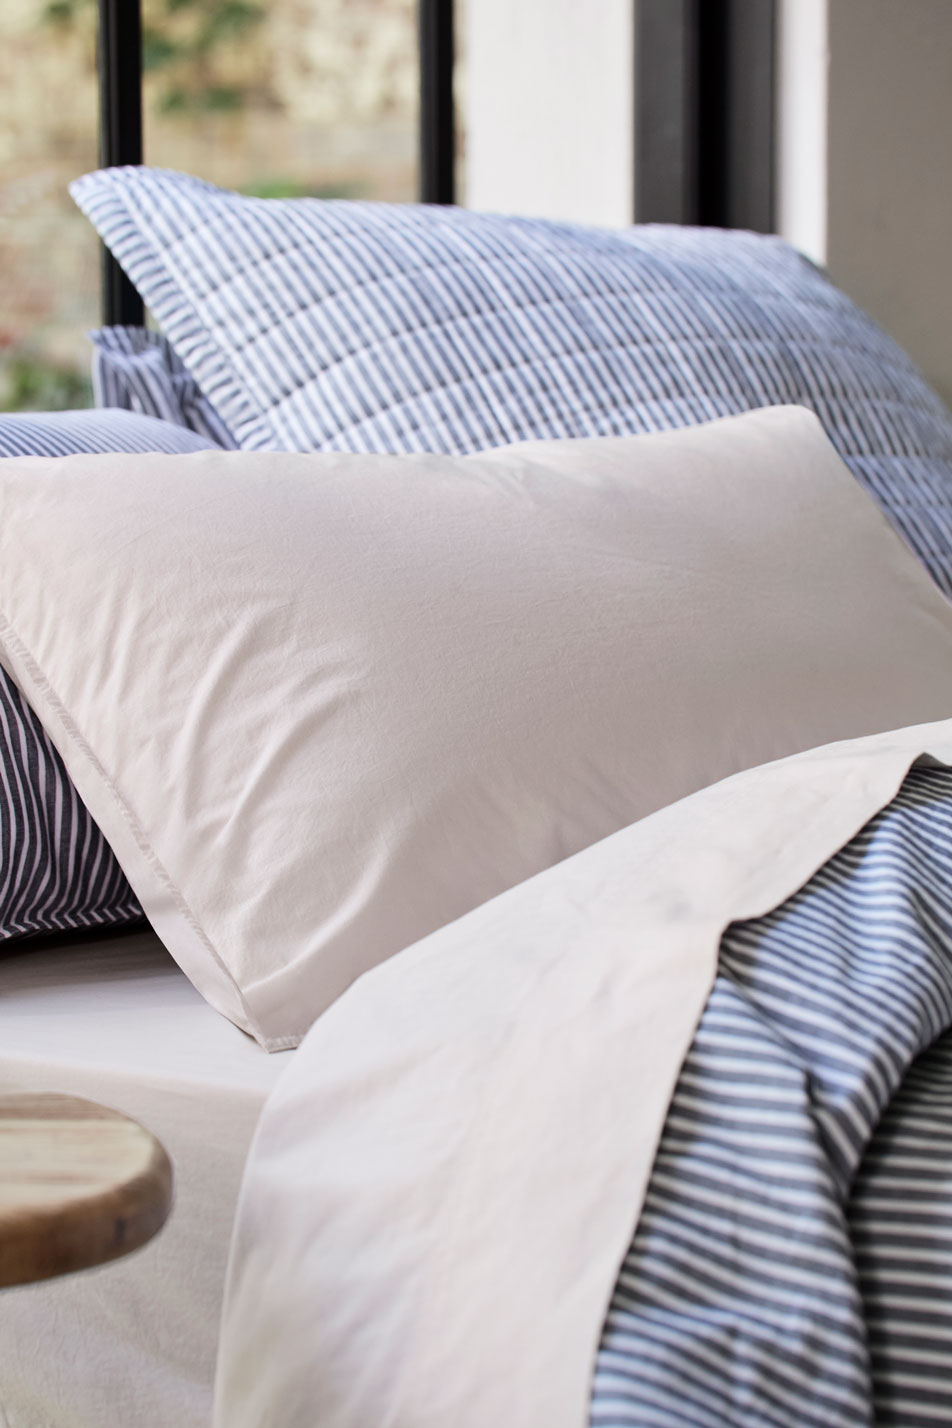 A close-up of pillows on top of a bed, dressed in neutral sheets and a striped quilt